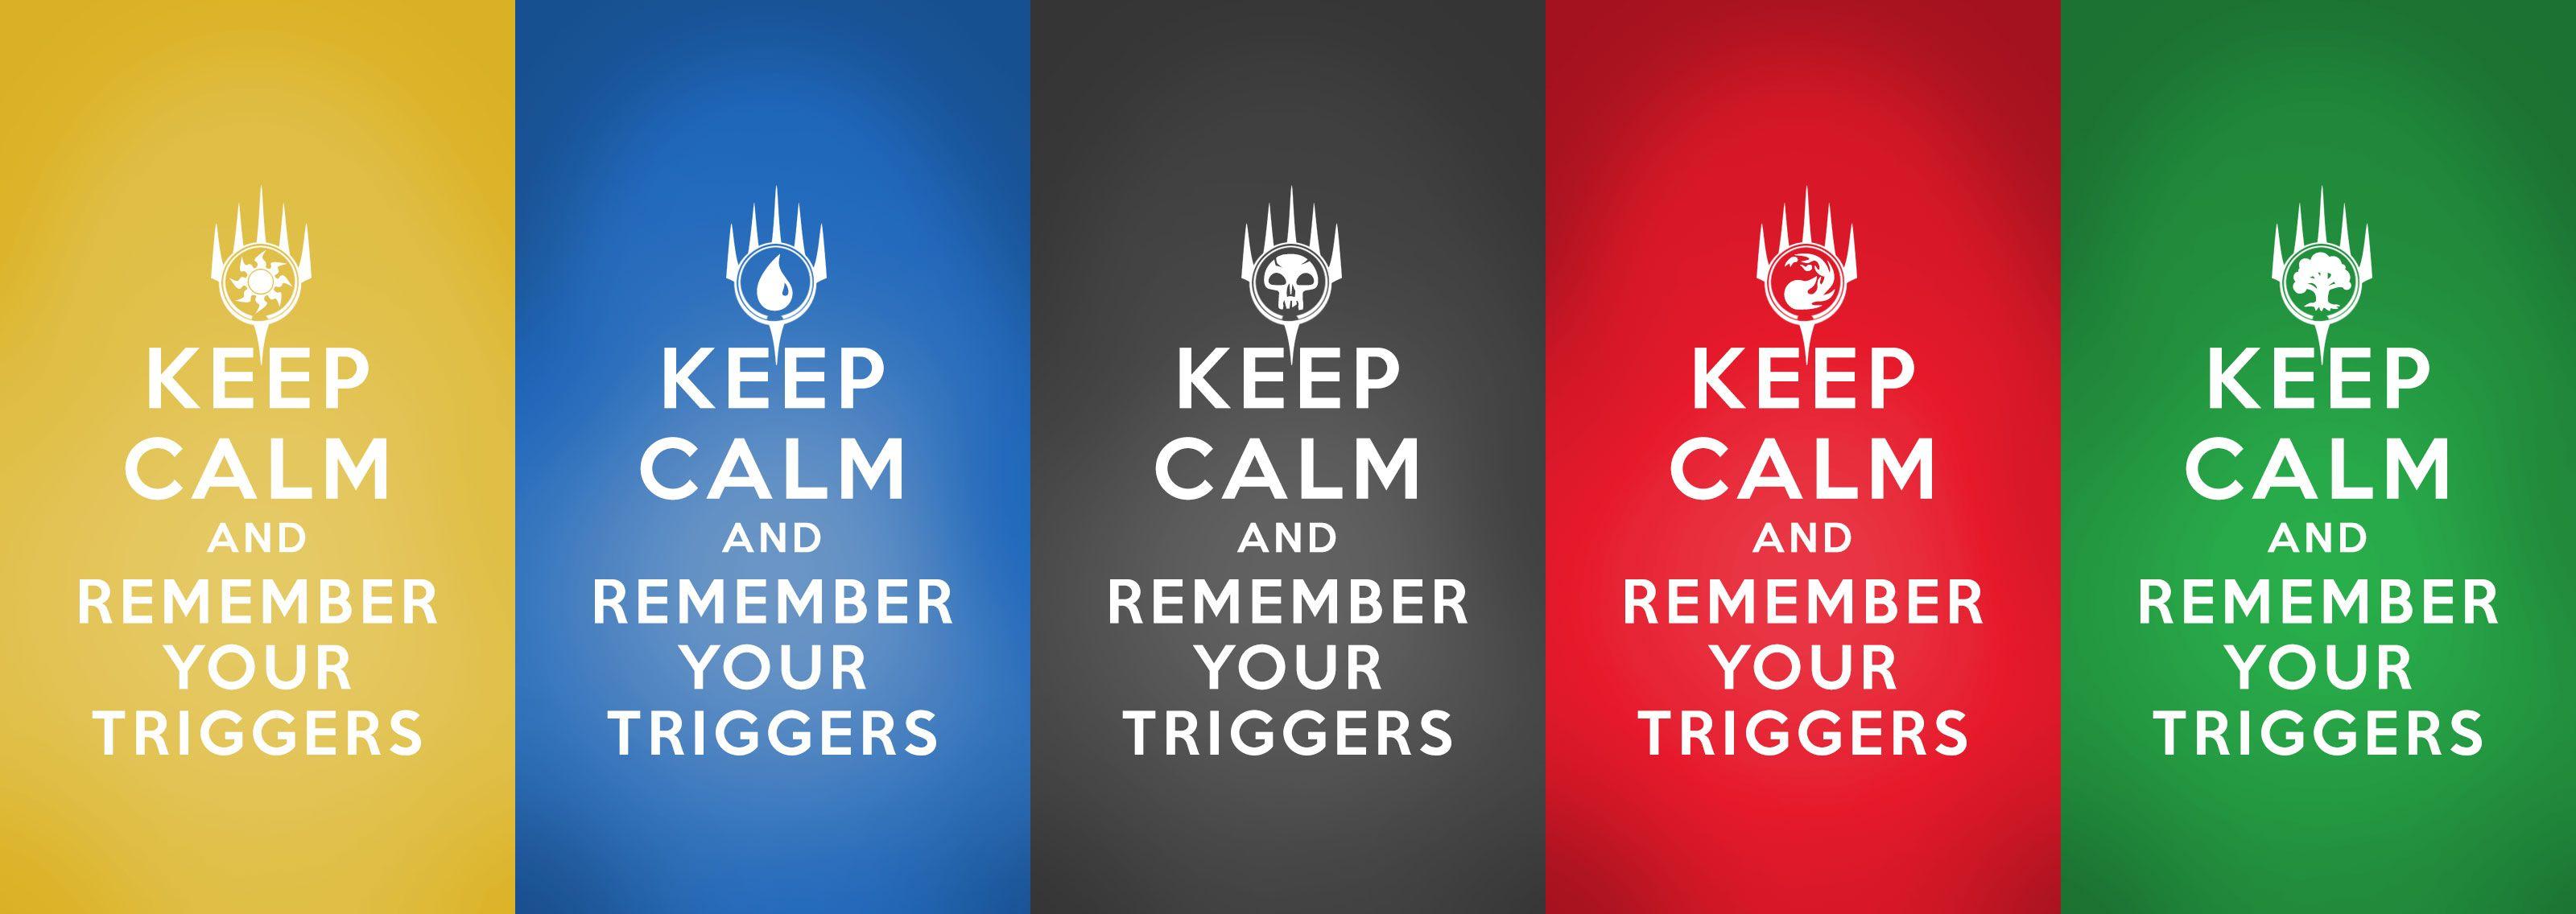 Keep Calm Wallpaper For iPhone